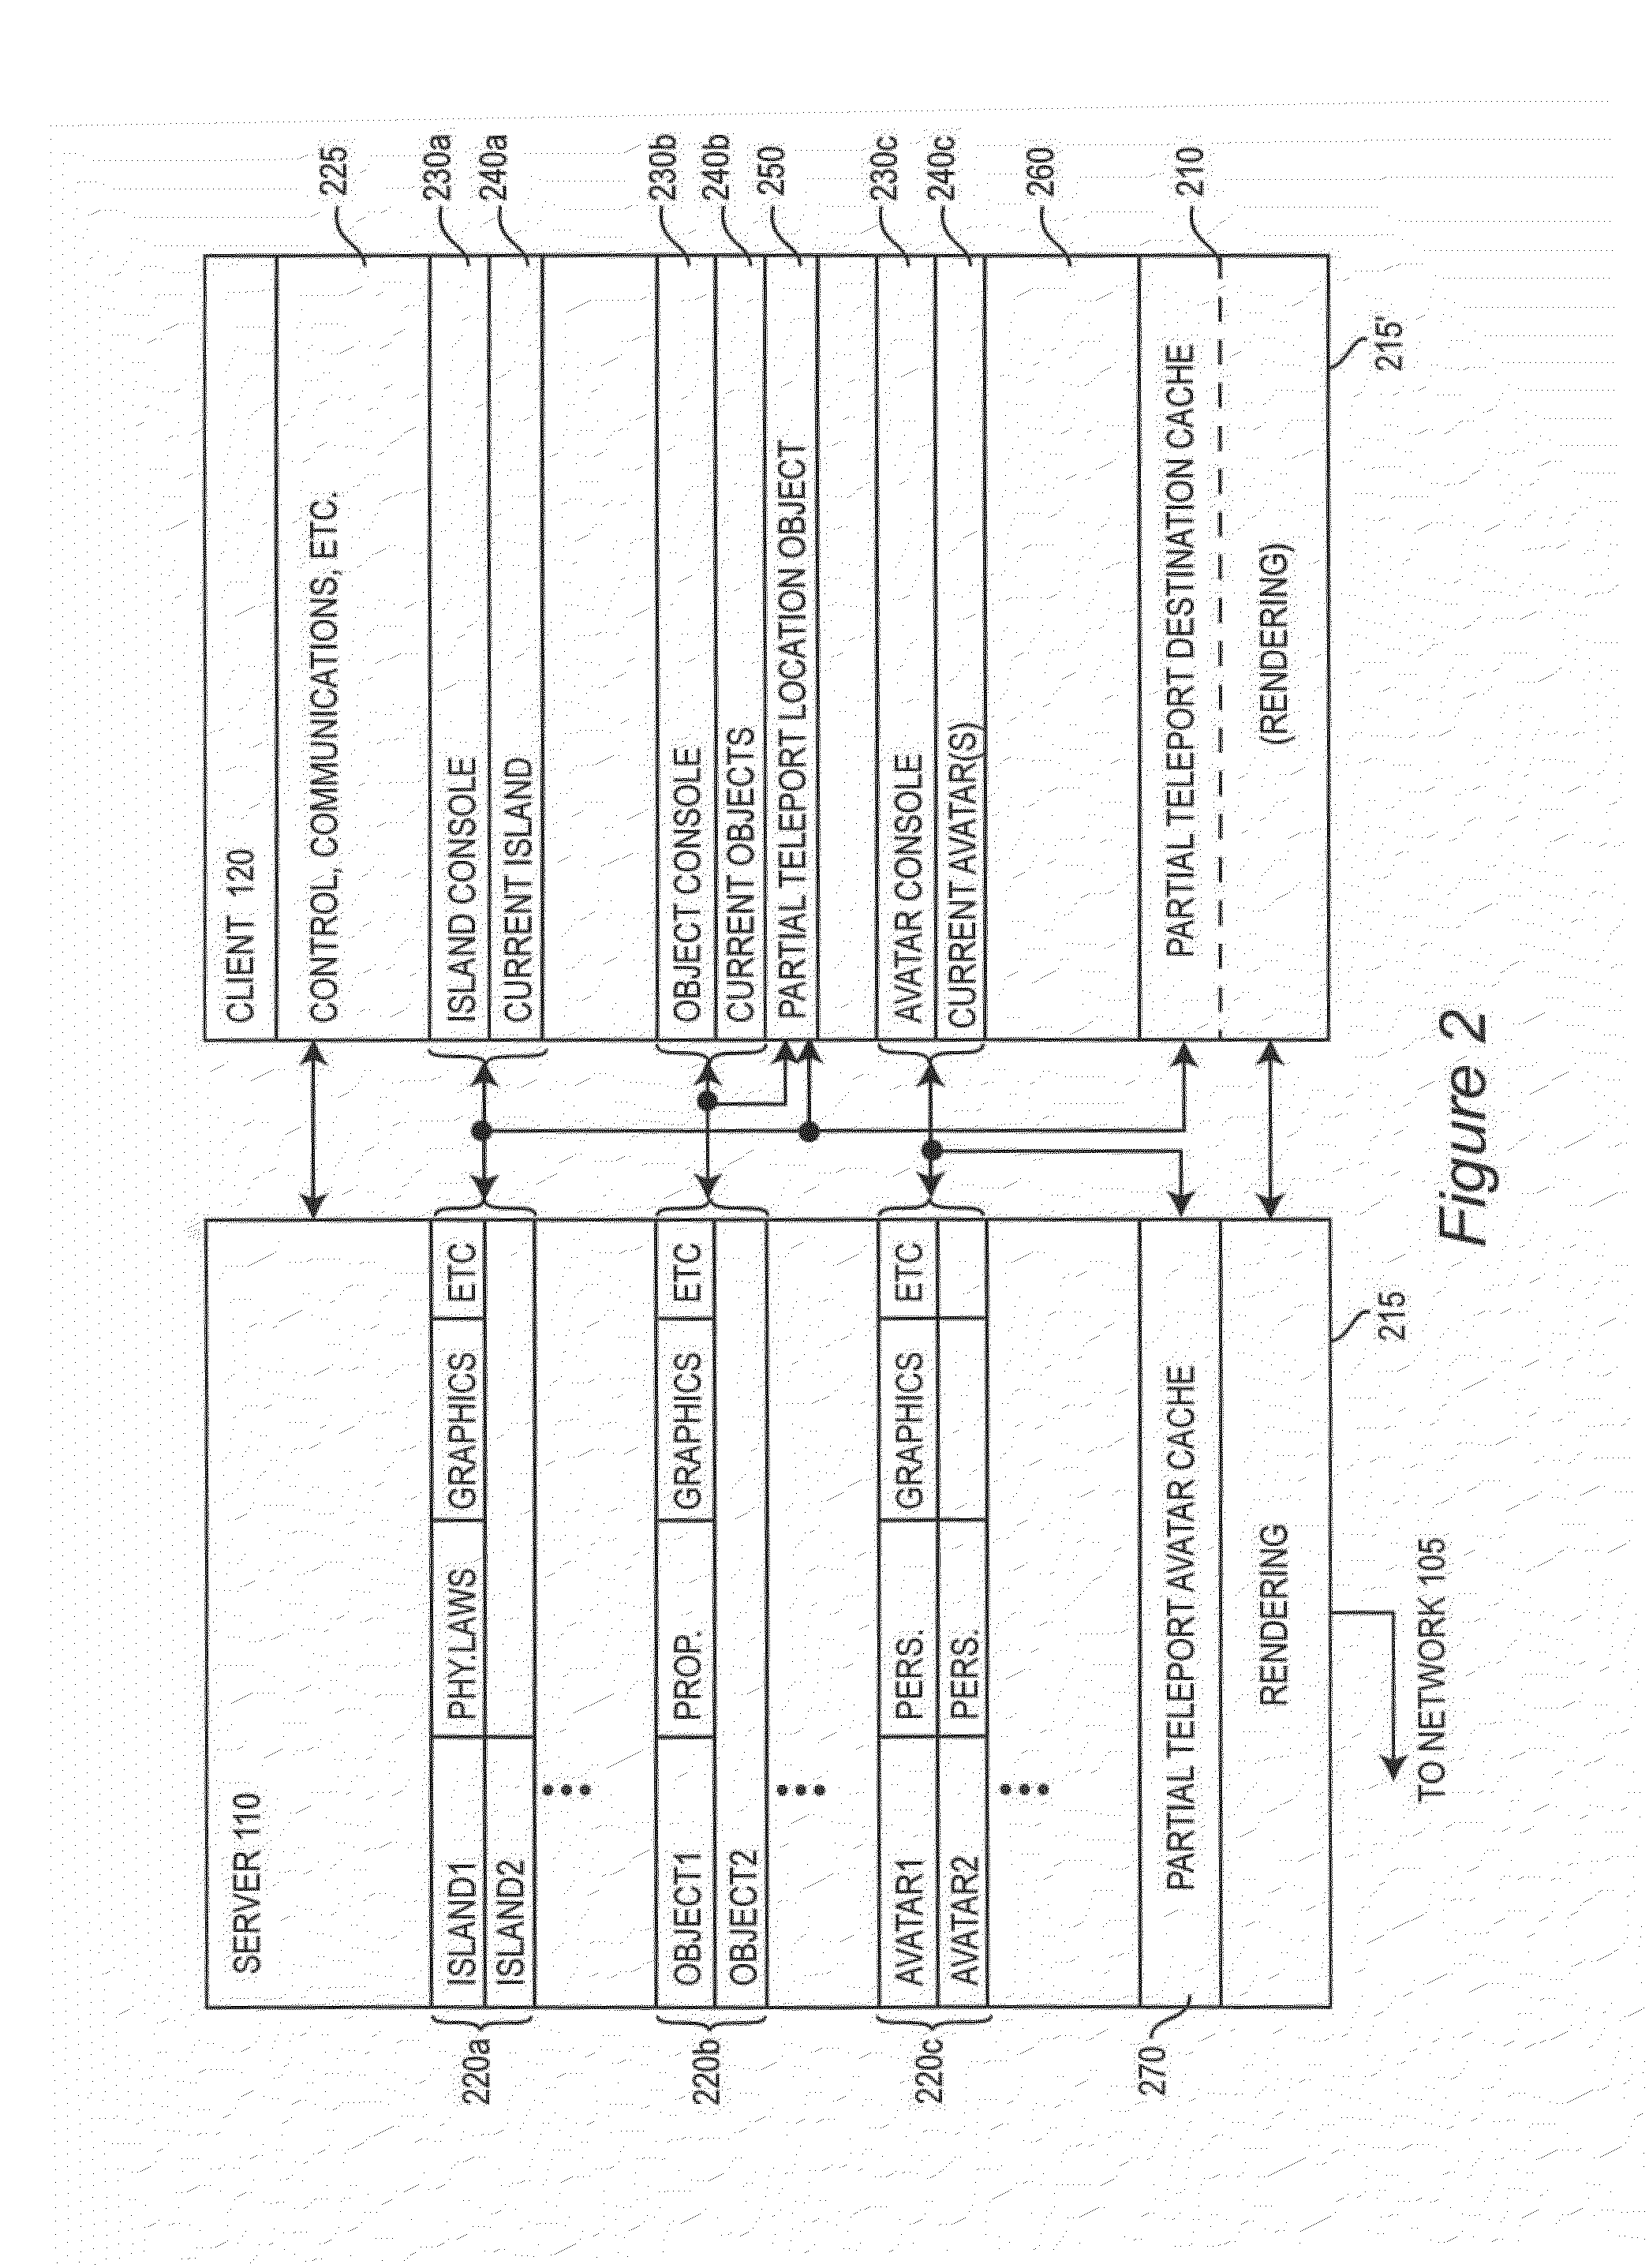 System and Method for Using Partial Teleportation or Relocation in Virtual Worlds